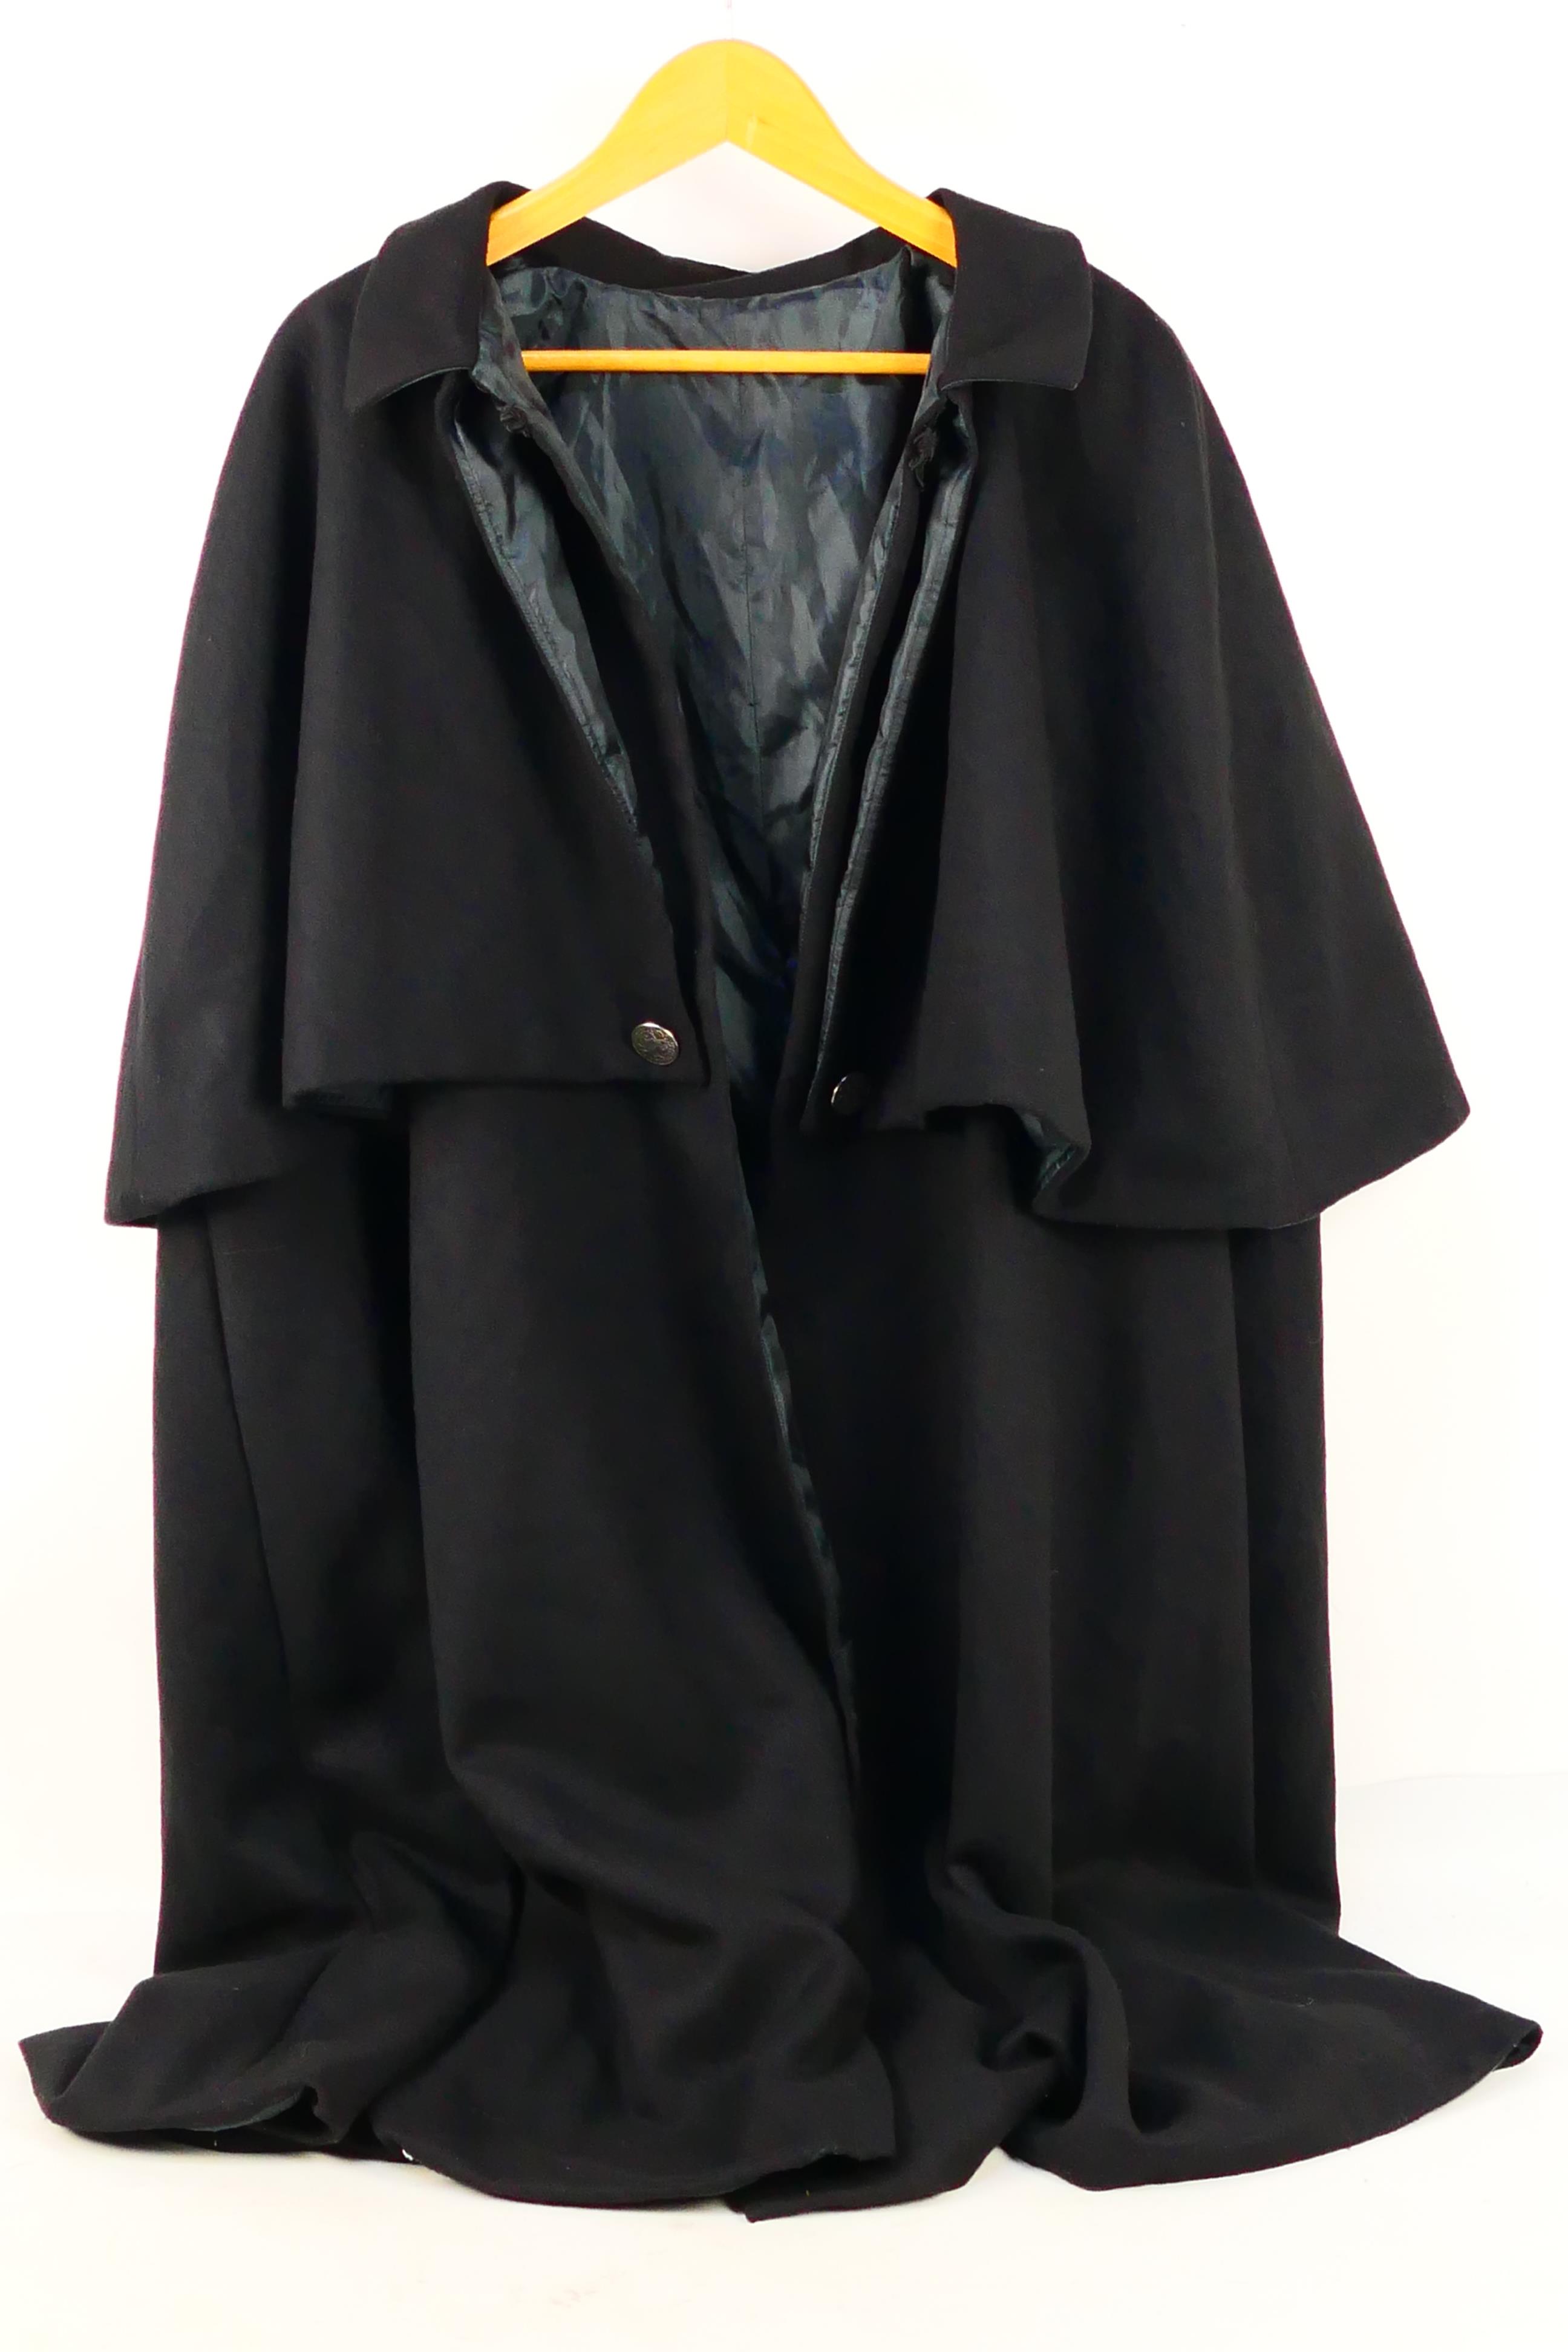 Theatrical Costume - An 18th century style highwayman / Dick Turpin costume comprising trousers, - Image 6 of 25